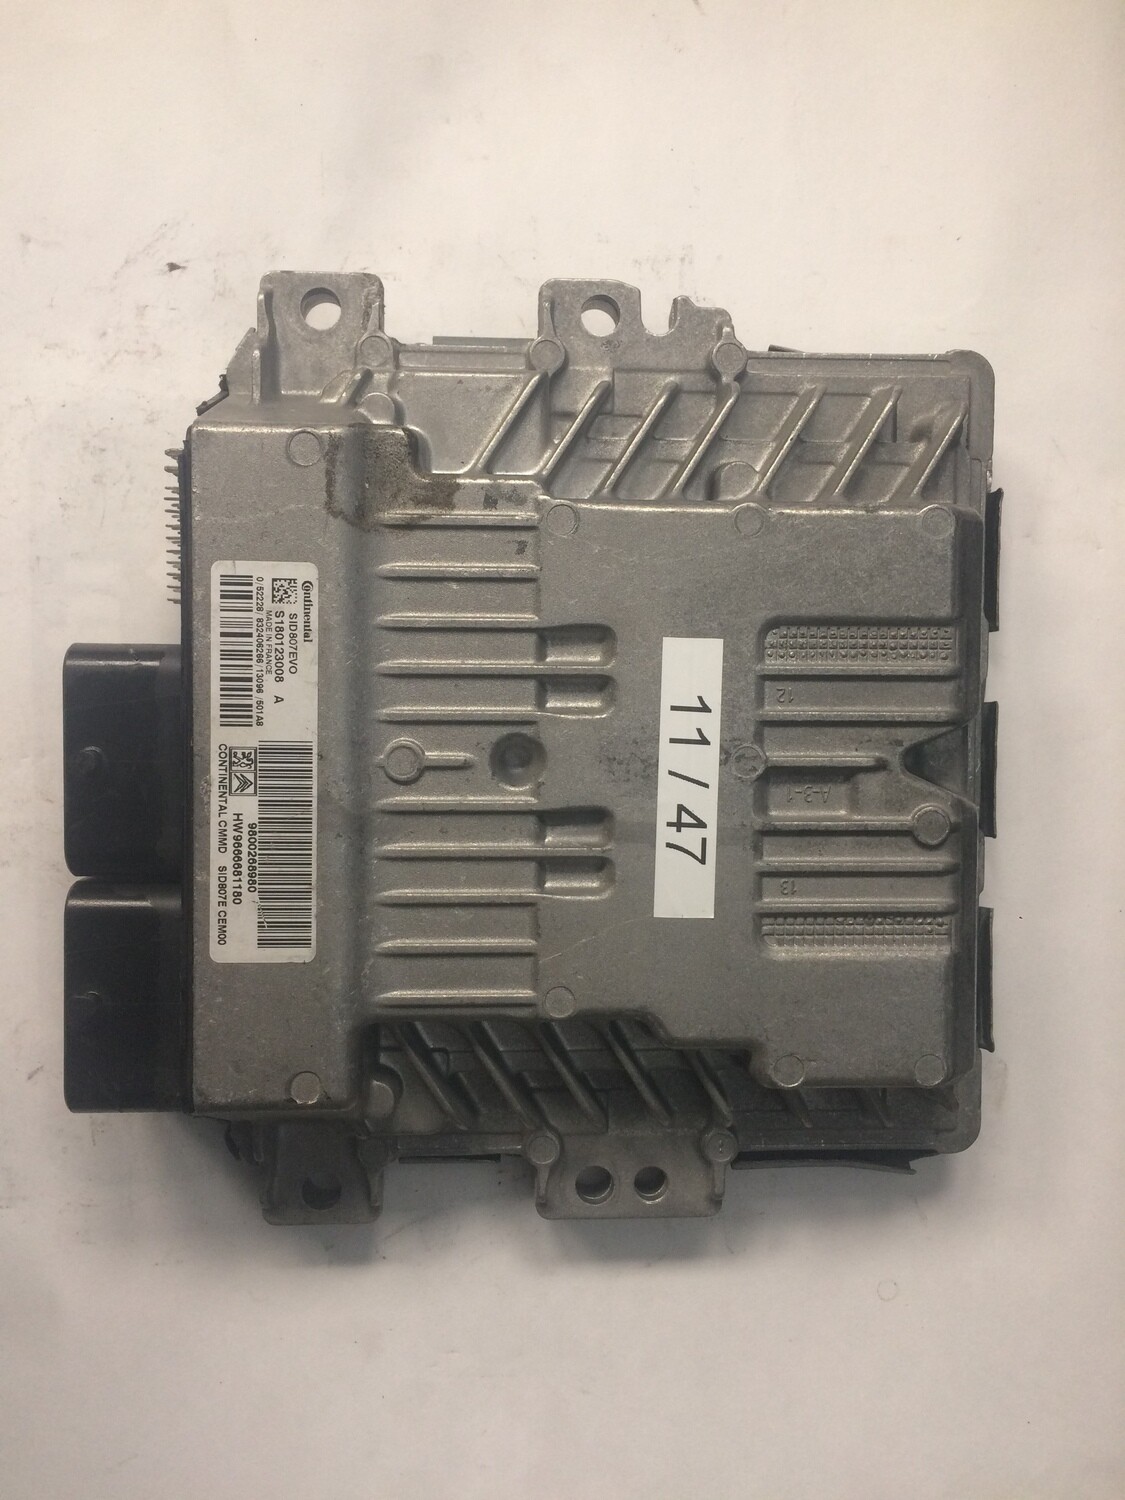 11-47 Centralina Motore Continental S180123008 A S180123008A 9666681180 SID807EVO CITROEN / PEUGEOT Diesel VARIE 1.6